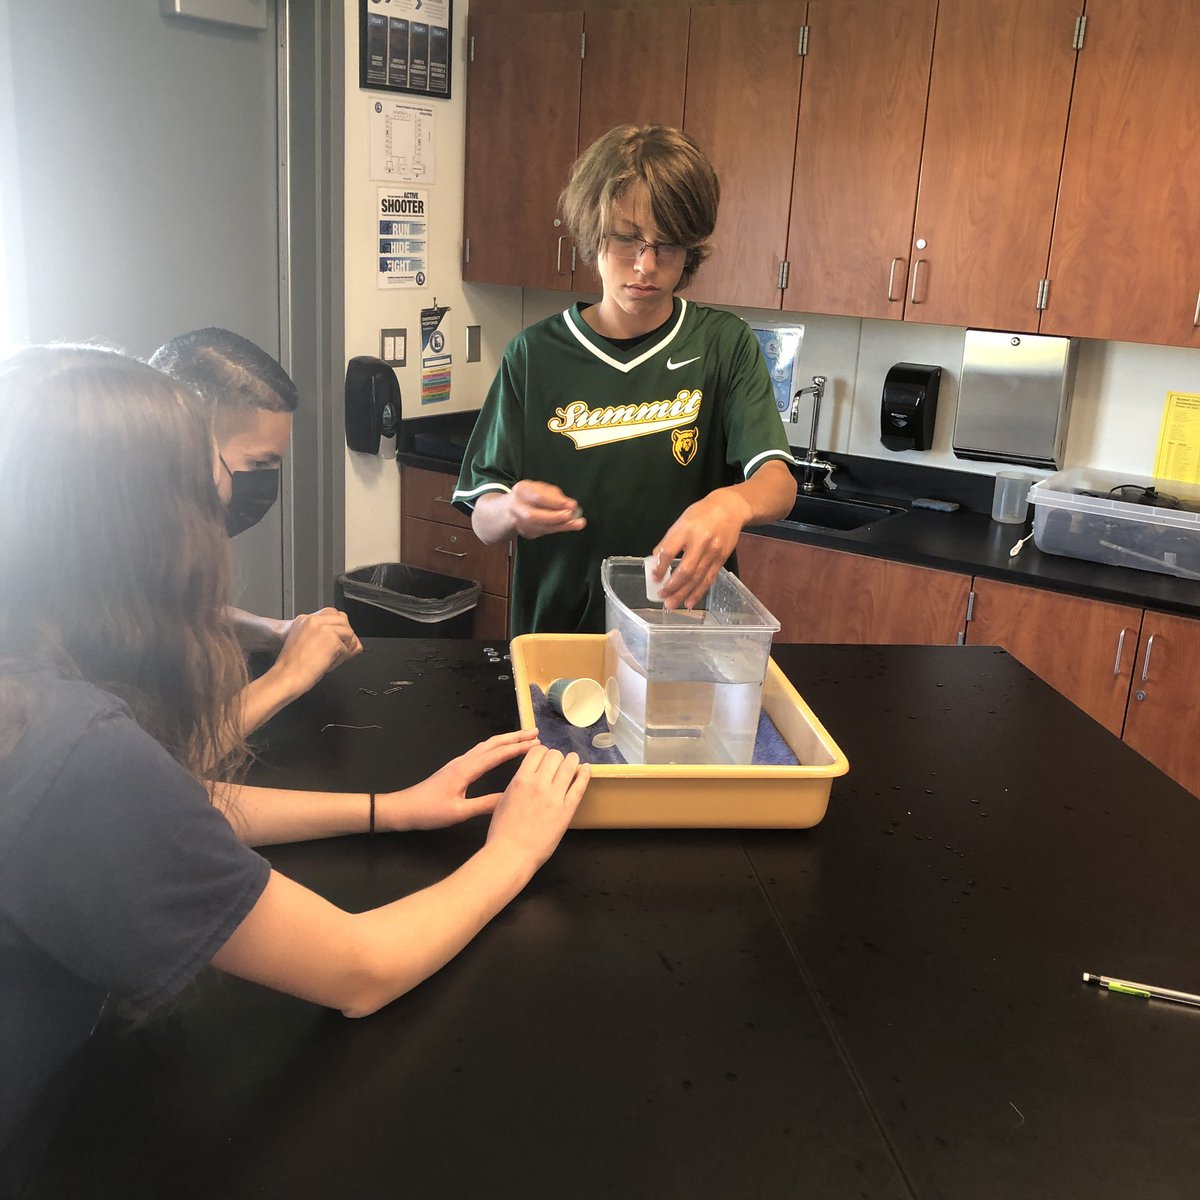 Doing the buoyancy challenge during testing block. Make the canister “hover” without floating or sinking. #SCIAJourney #SCIABears #whateverittakes #everydaymatters #itsalifestyle #striveforgreatness #SCIAStrong